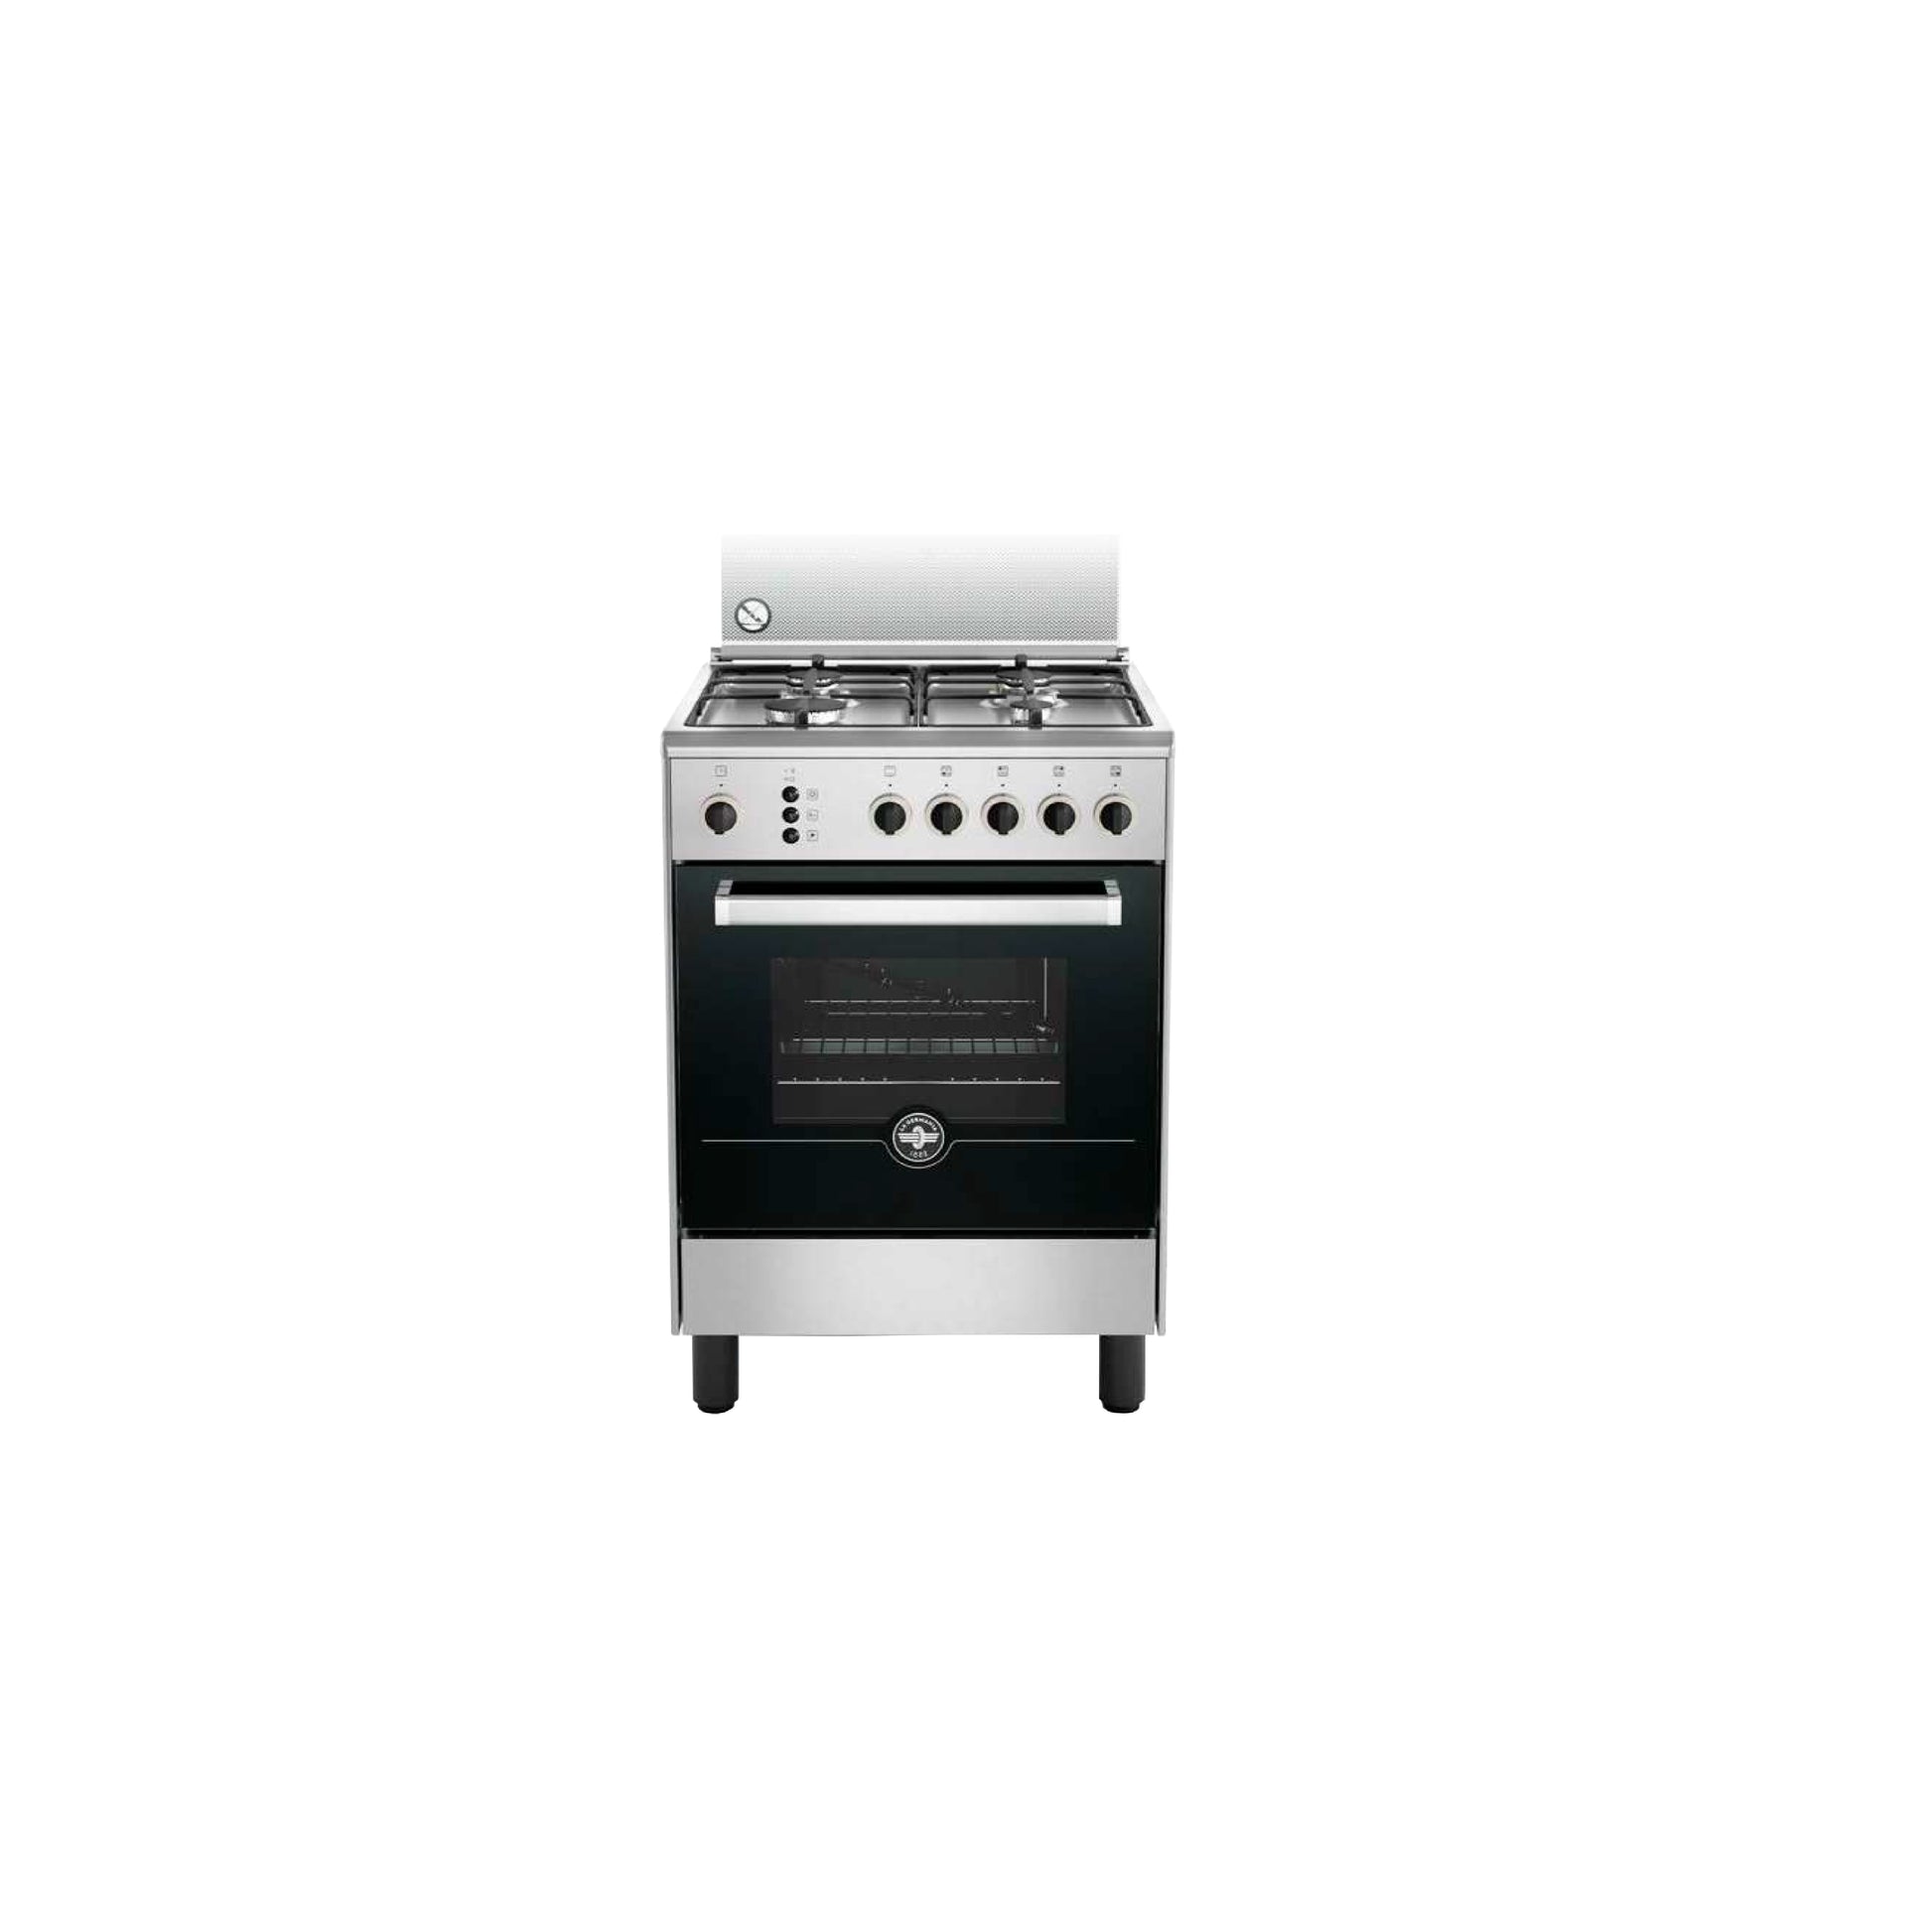 Lagermania Gas Cooker 60x60cm (M64081EX0) - Stainless